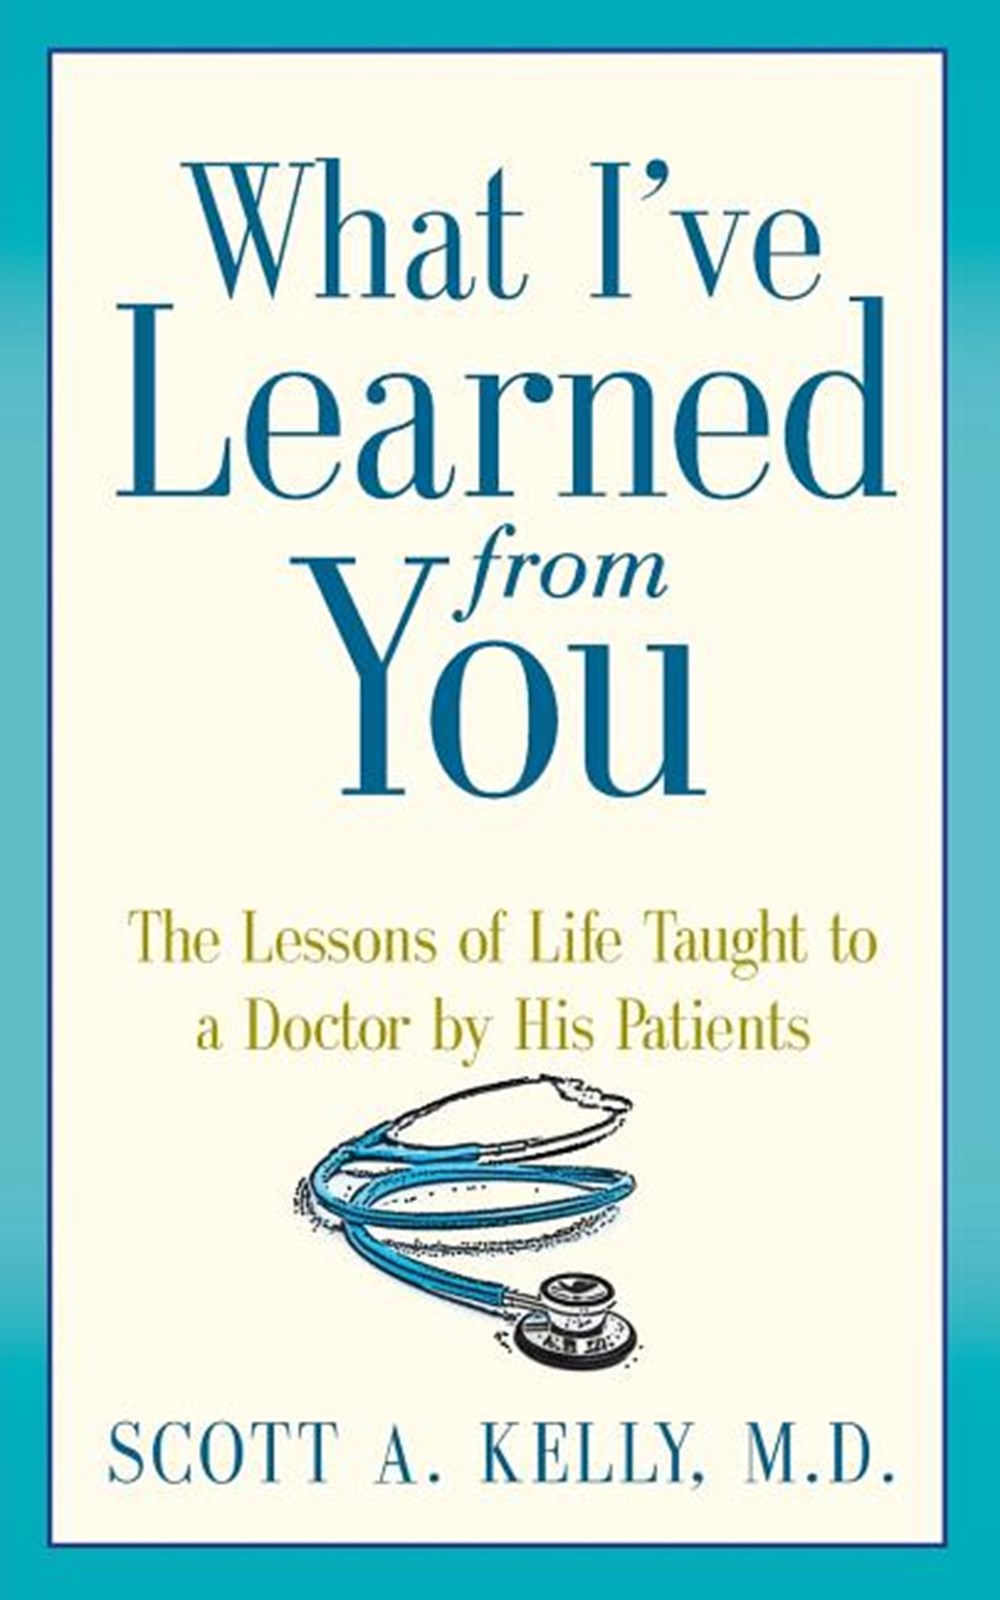 What I've Learned from You: The Lessons of Life Taught to a Doctor by His Patients